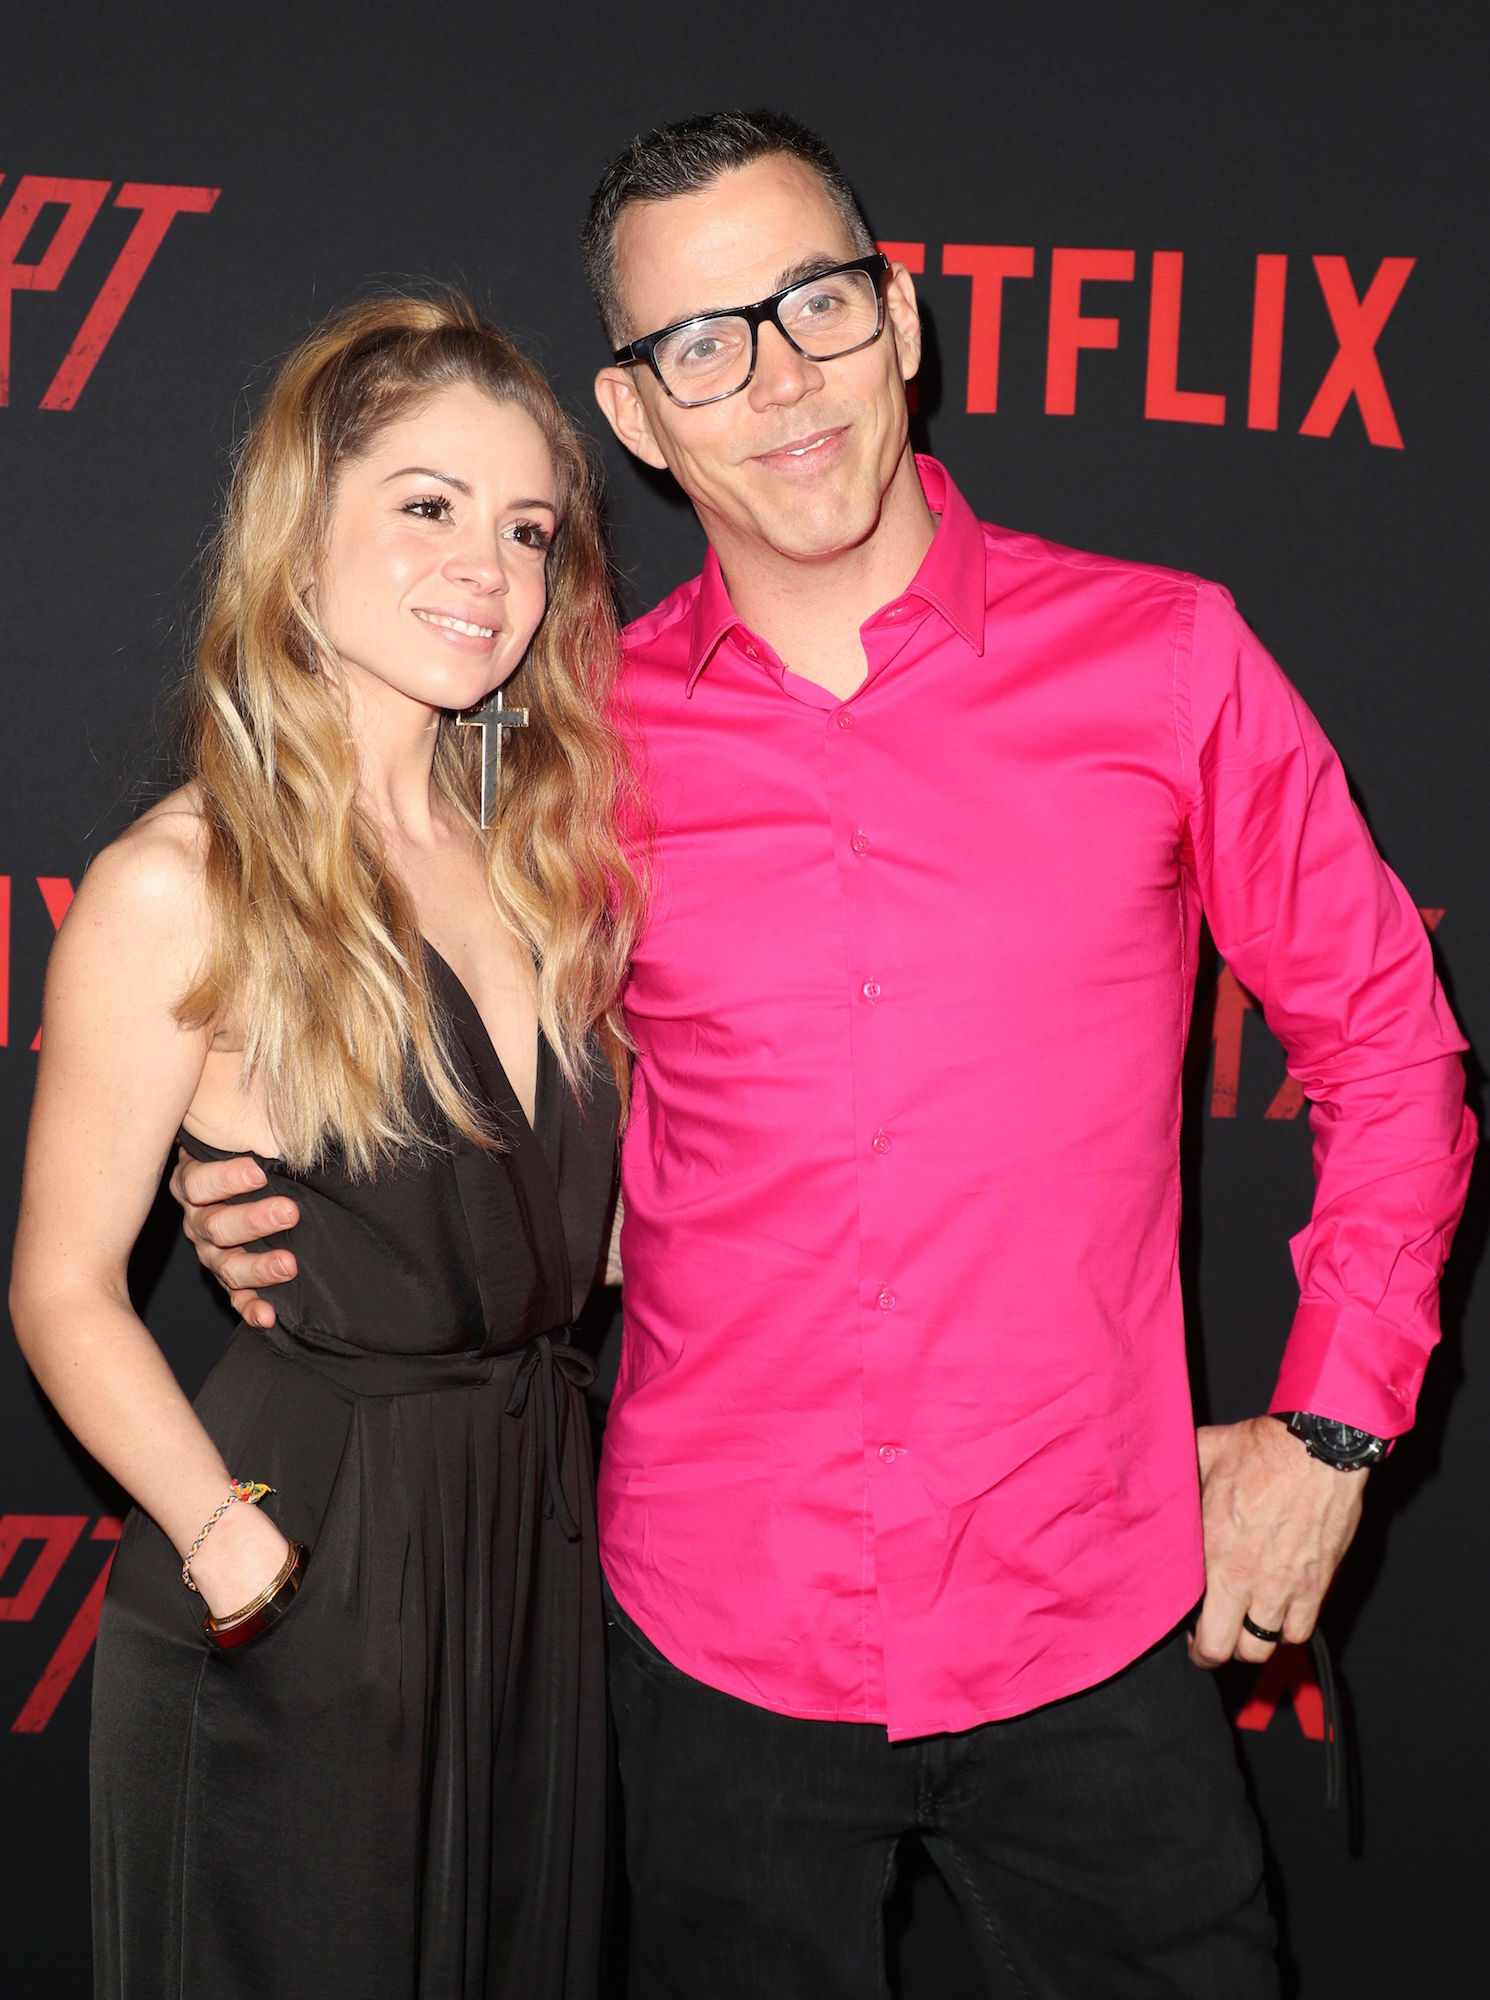 Dating Naked Couples On Beach - Steve-O's Fiancee Became More Comfortable With His Nudity Over Time